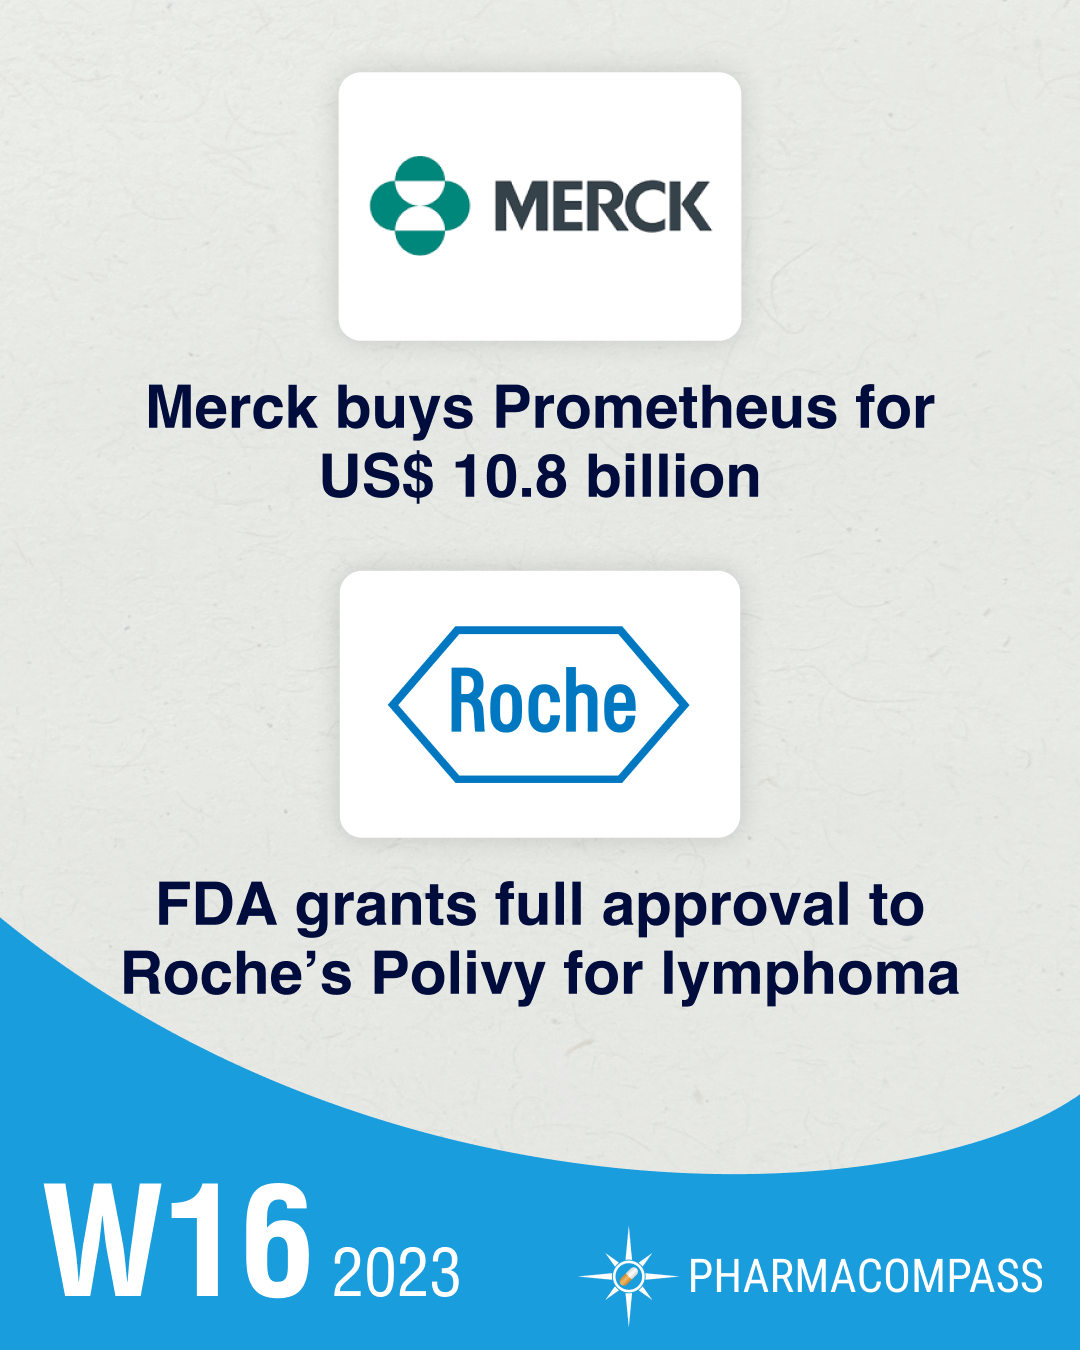 Merck buys Prometheus for US$ 10.8 bn; FDA grants full approval to Roche’s Polivy for lymphoma